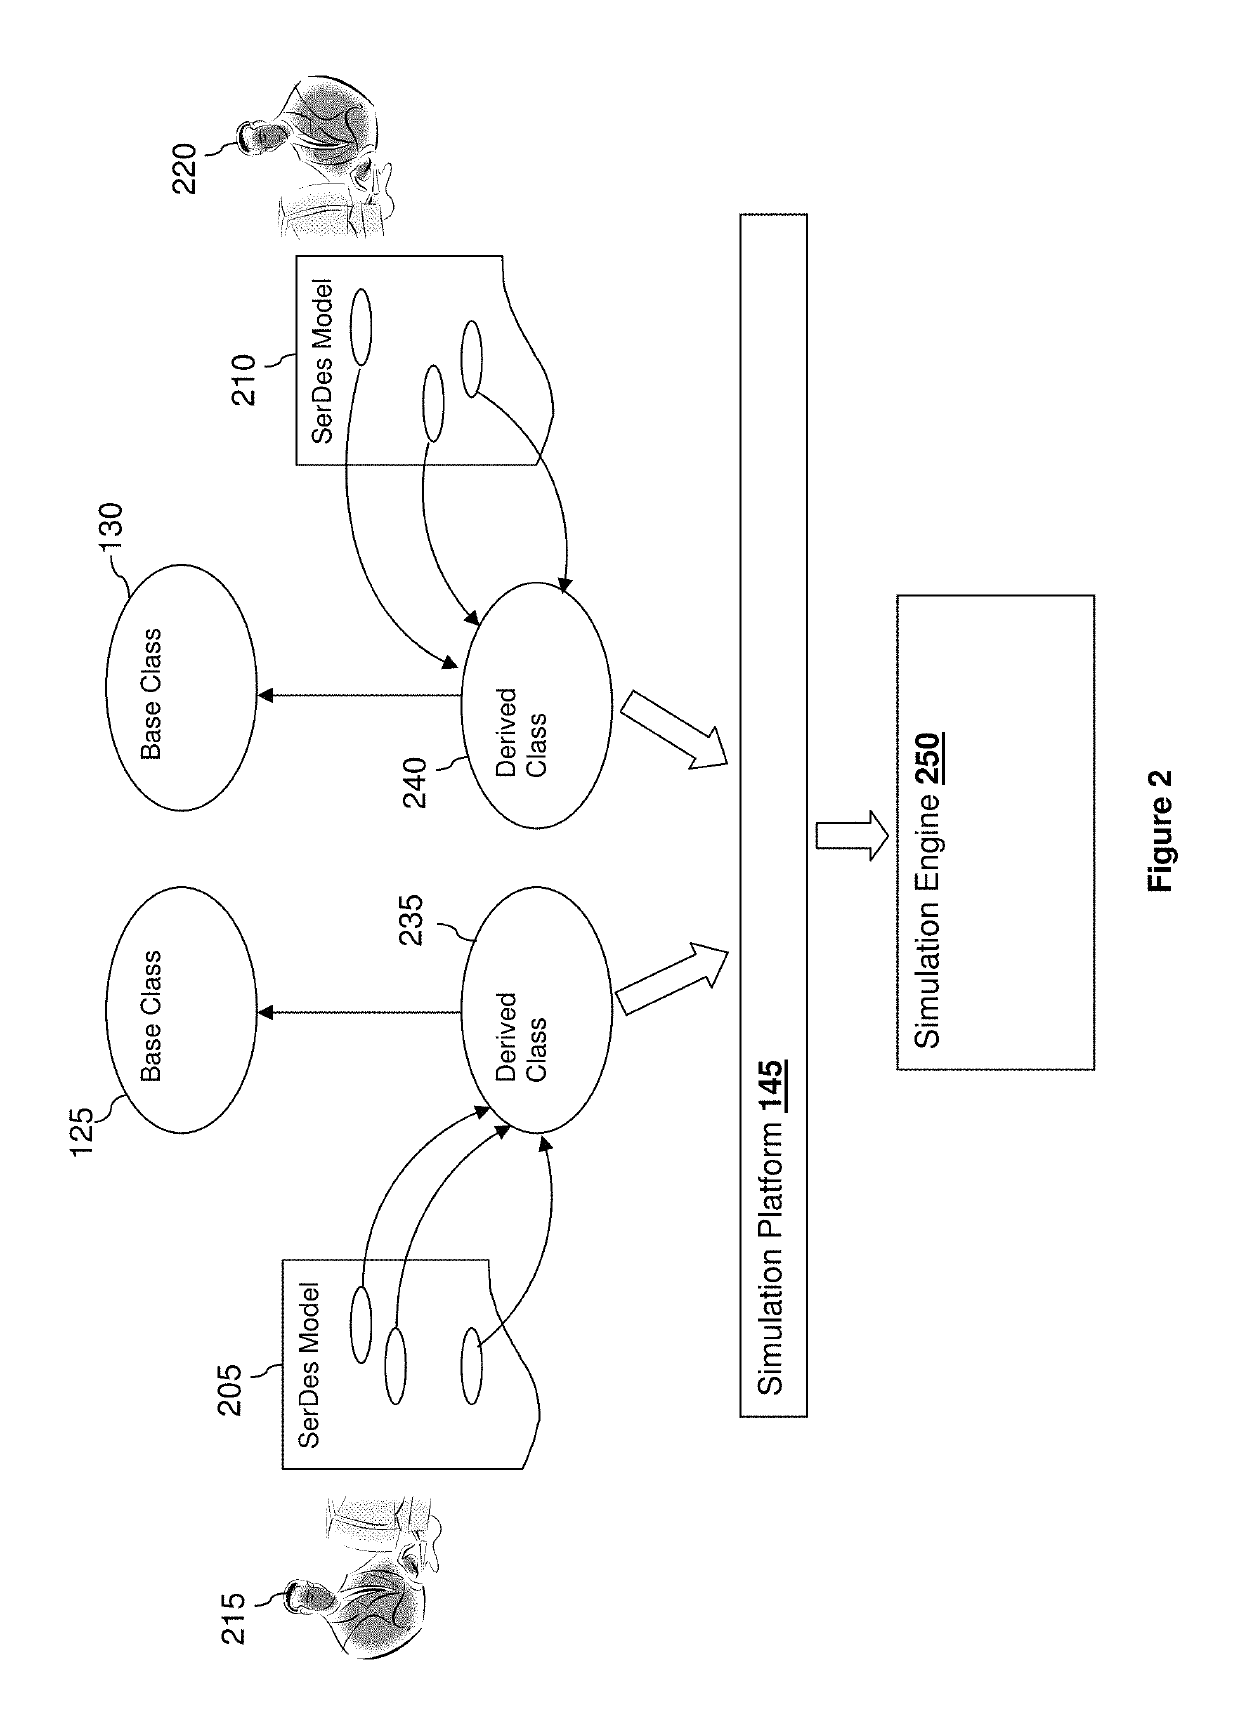 Methods and systems for simulating high-speed link designs